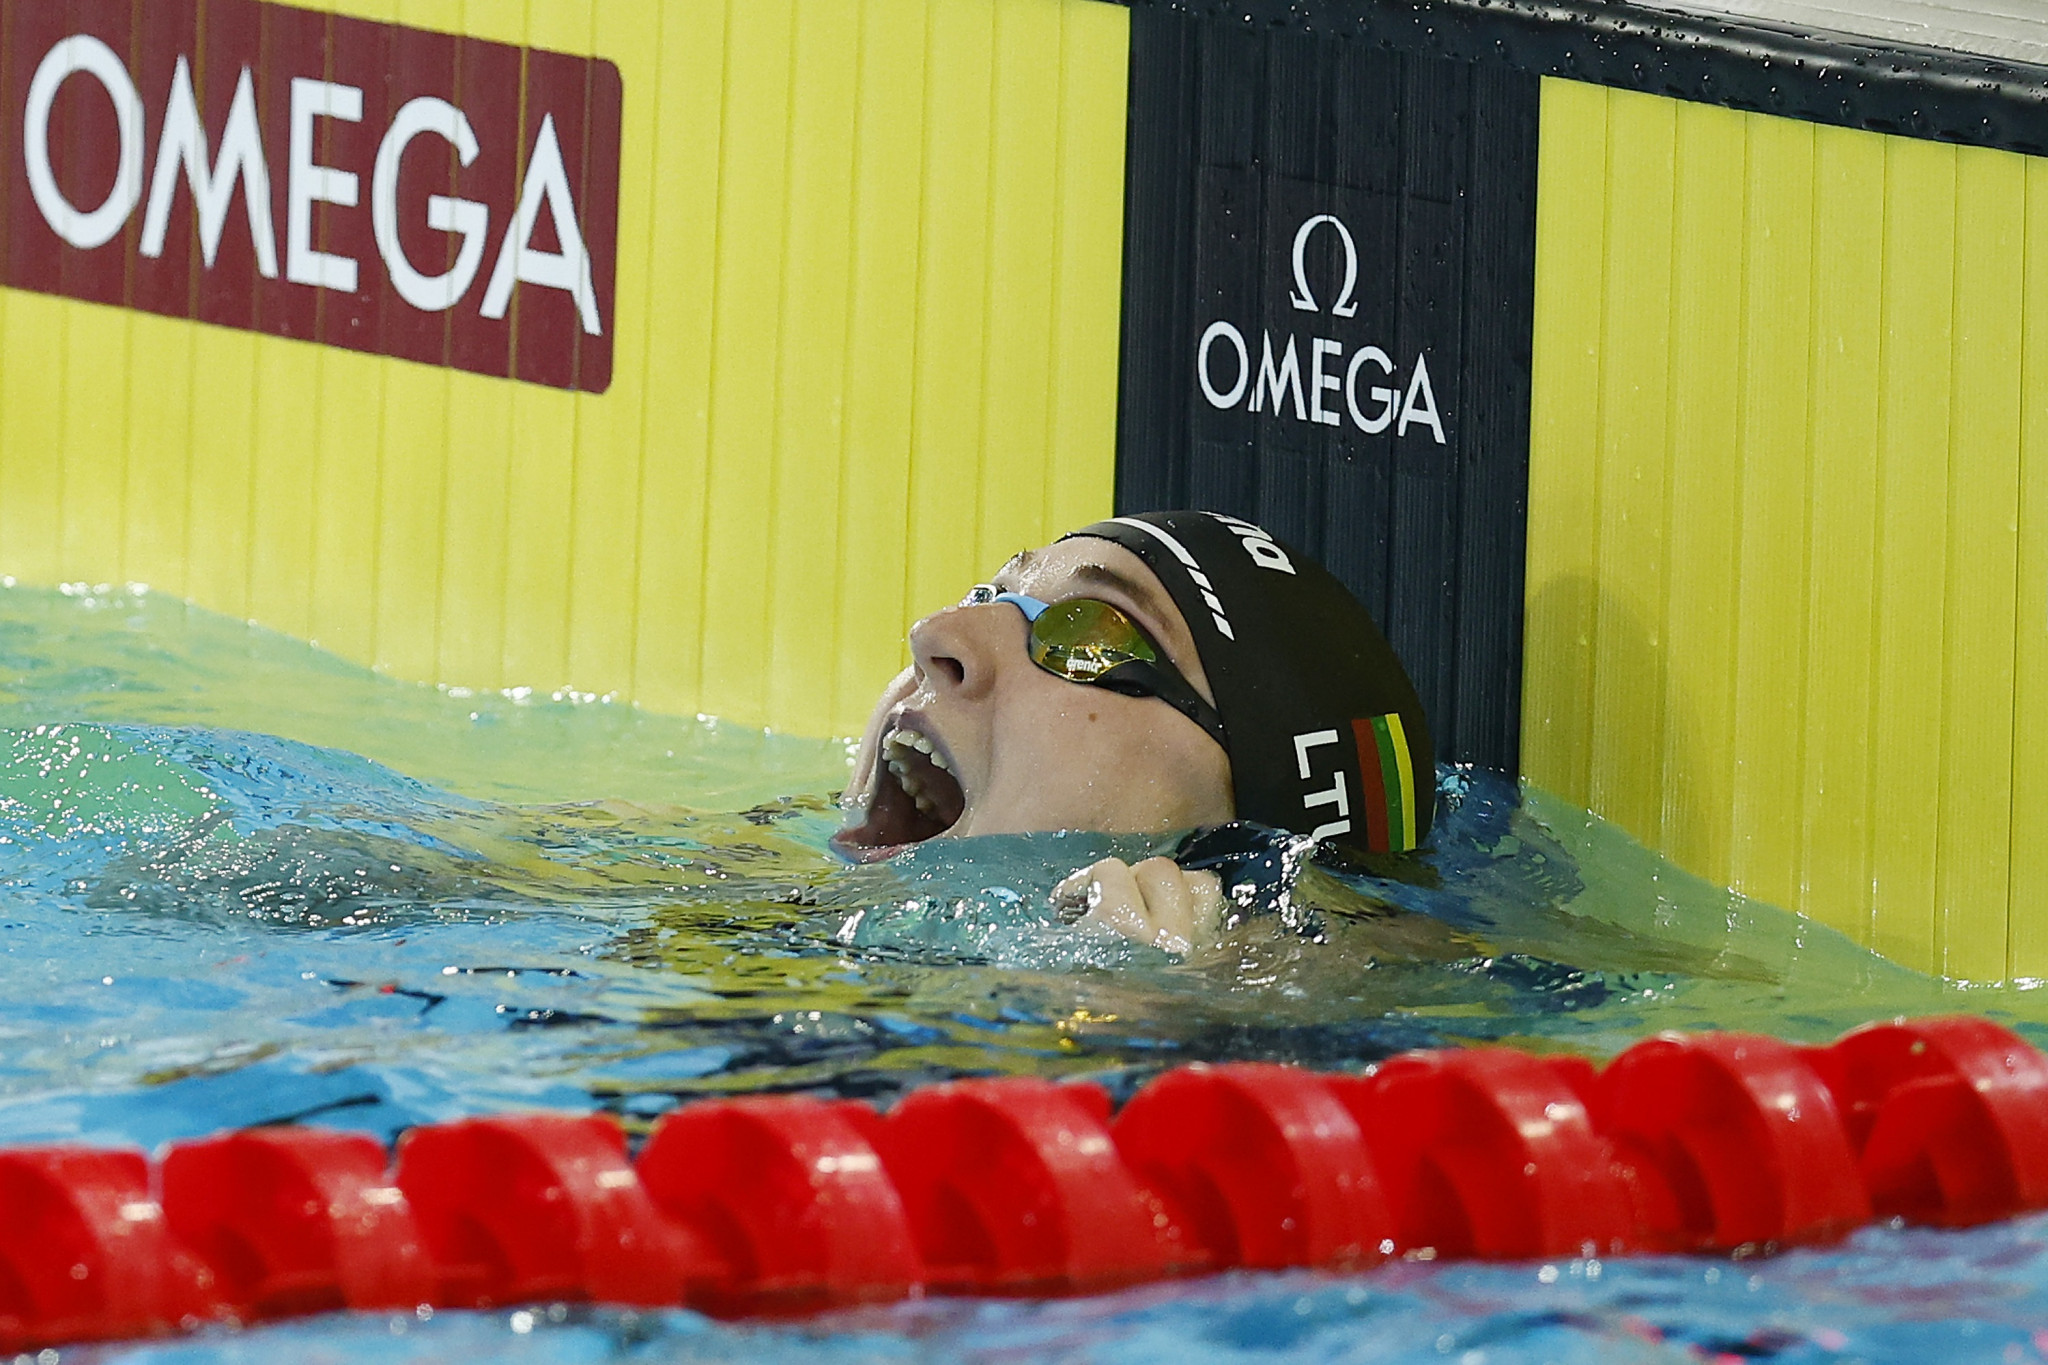 Lithuania's Rūta Meilutytė broke the women’s 50m breaststroke world record in the semi-finals ©Getty Images